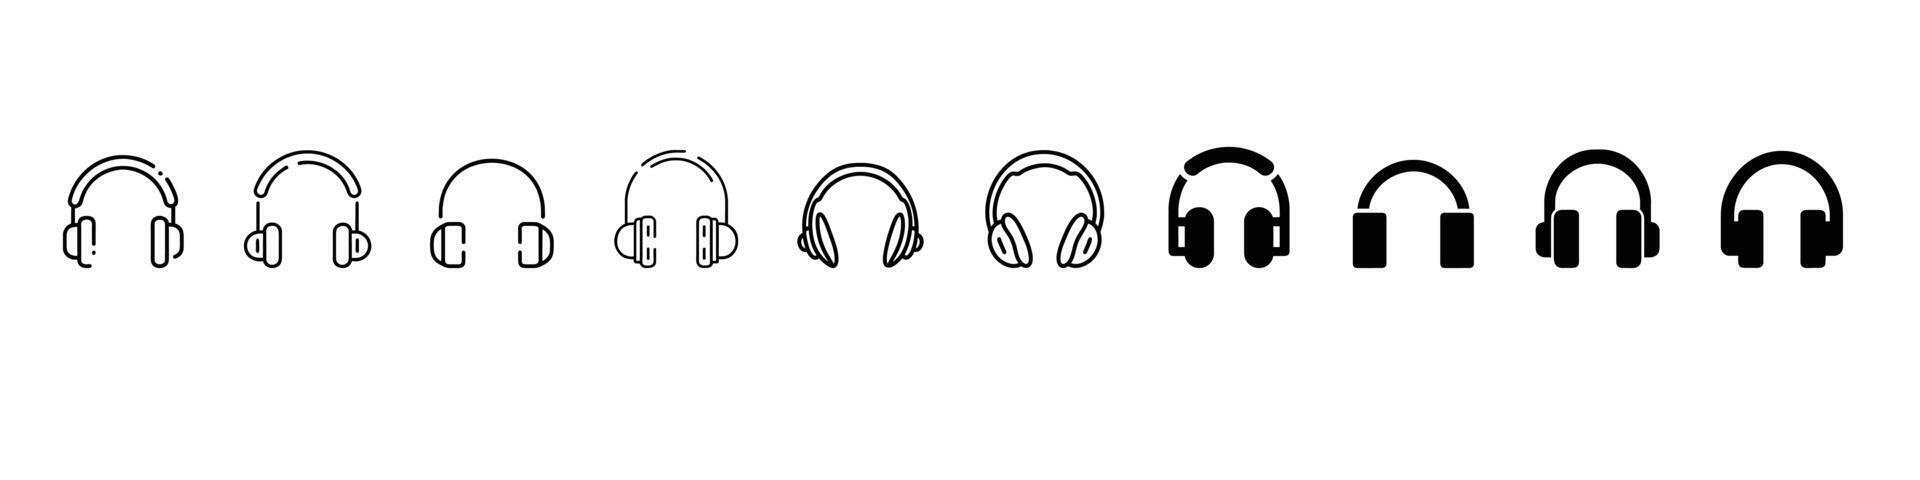 Headphone icon for web and mobile app. vector